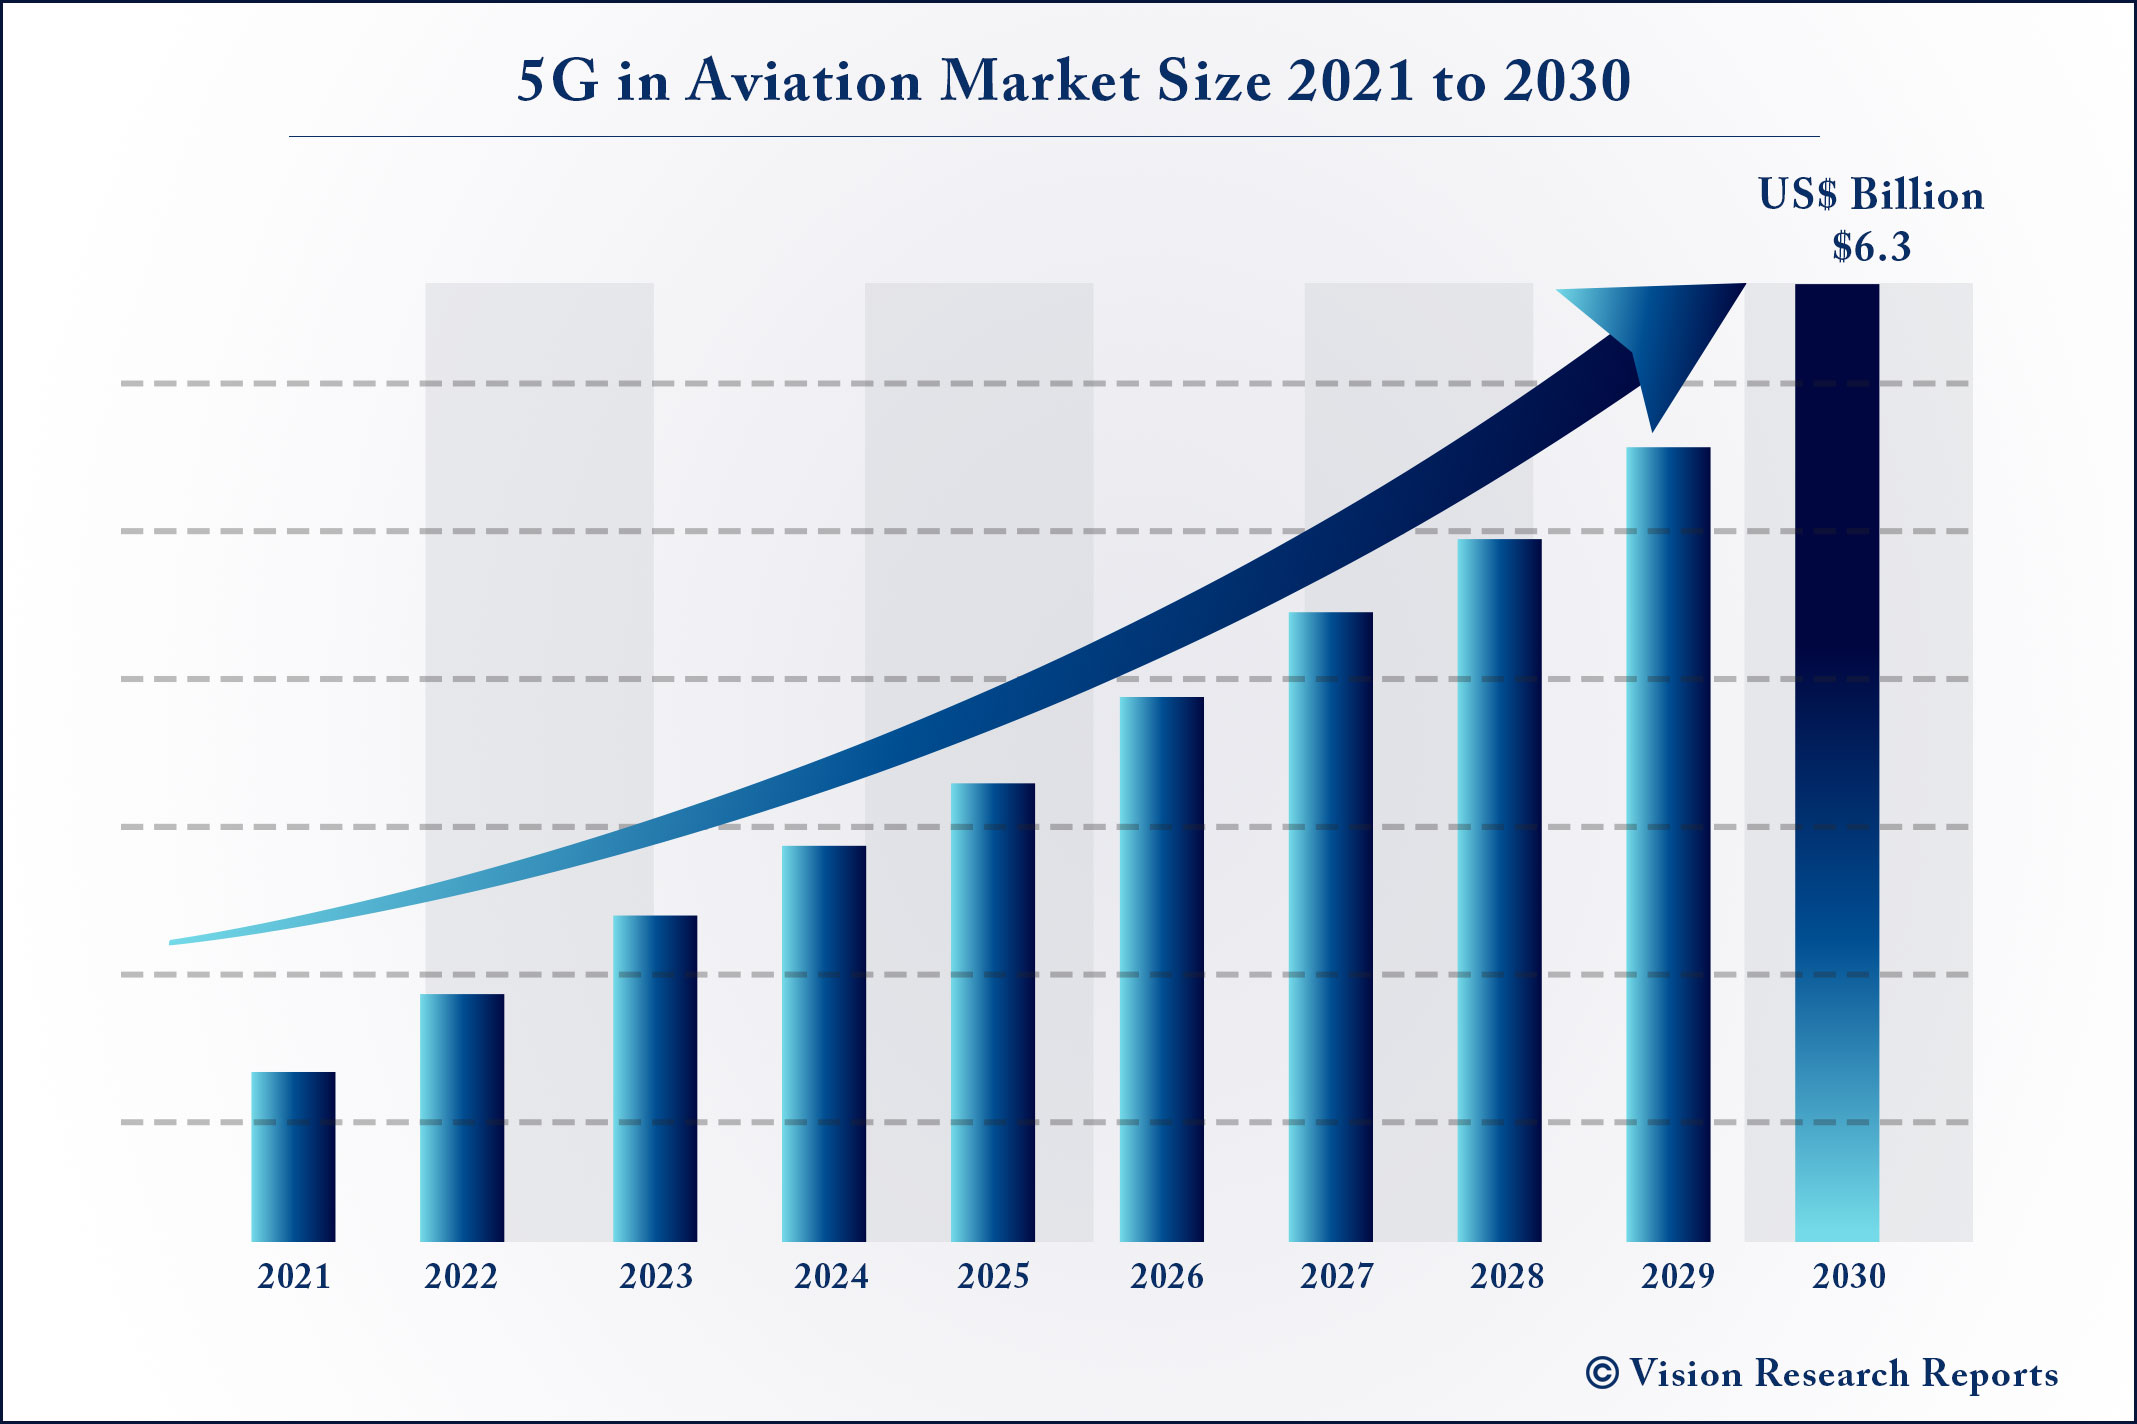 5G in Aviation Market Size 2021 to 2030